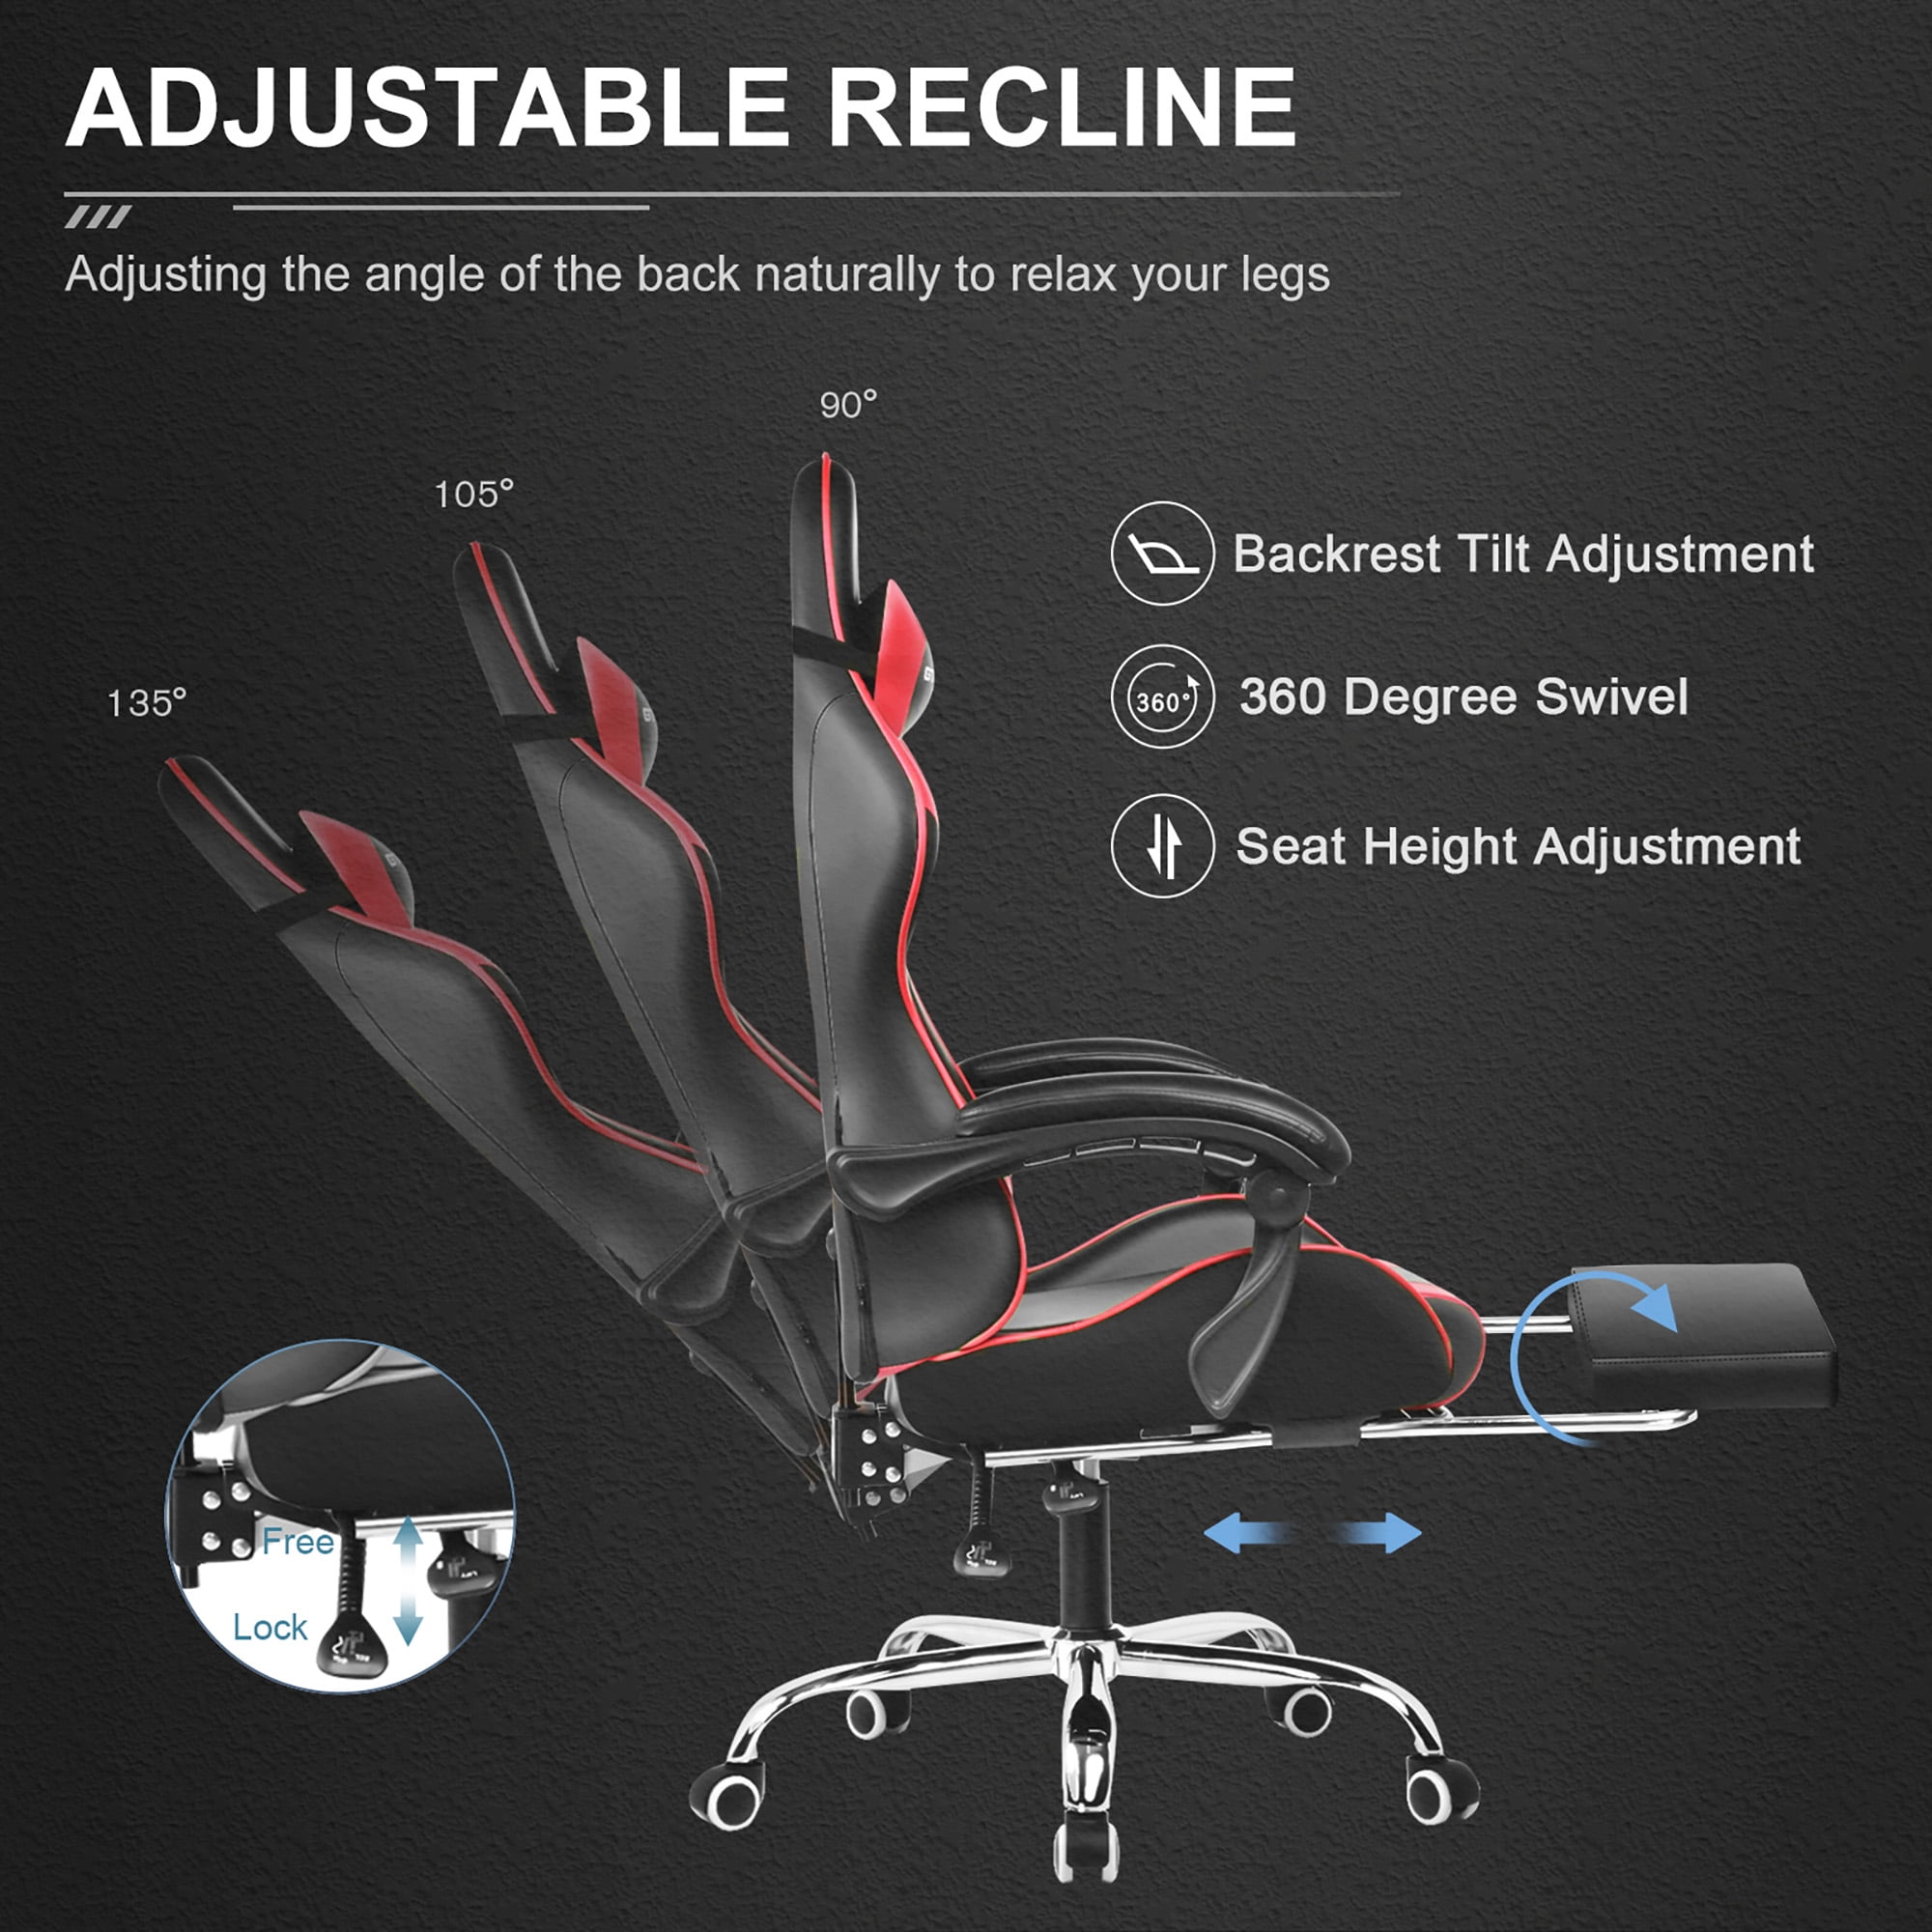 Gaming Chairs & Accessories